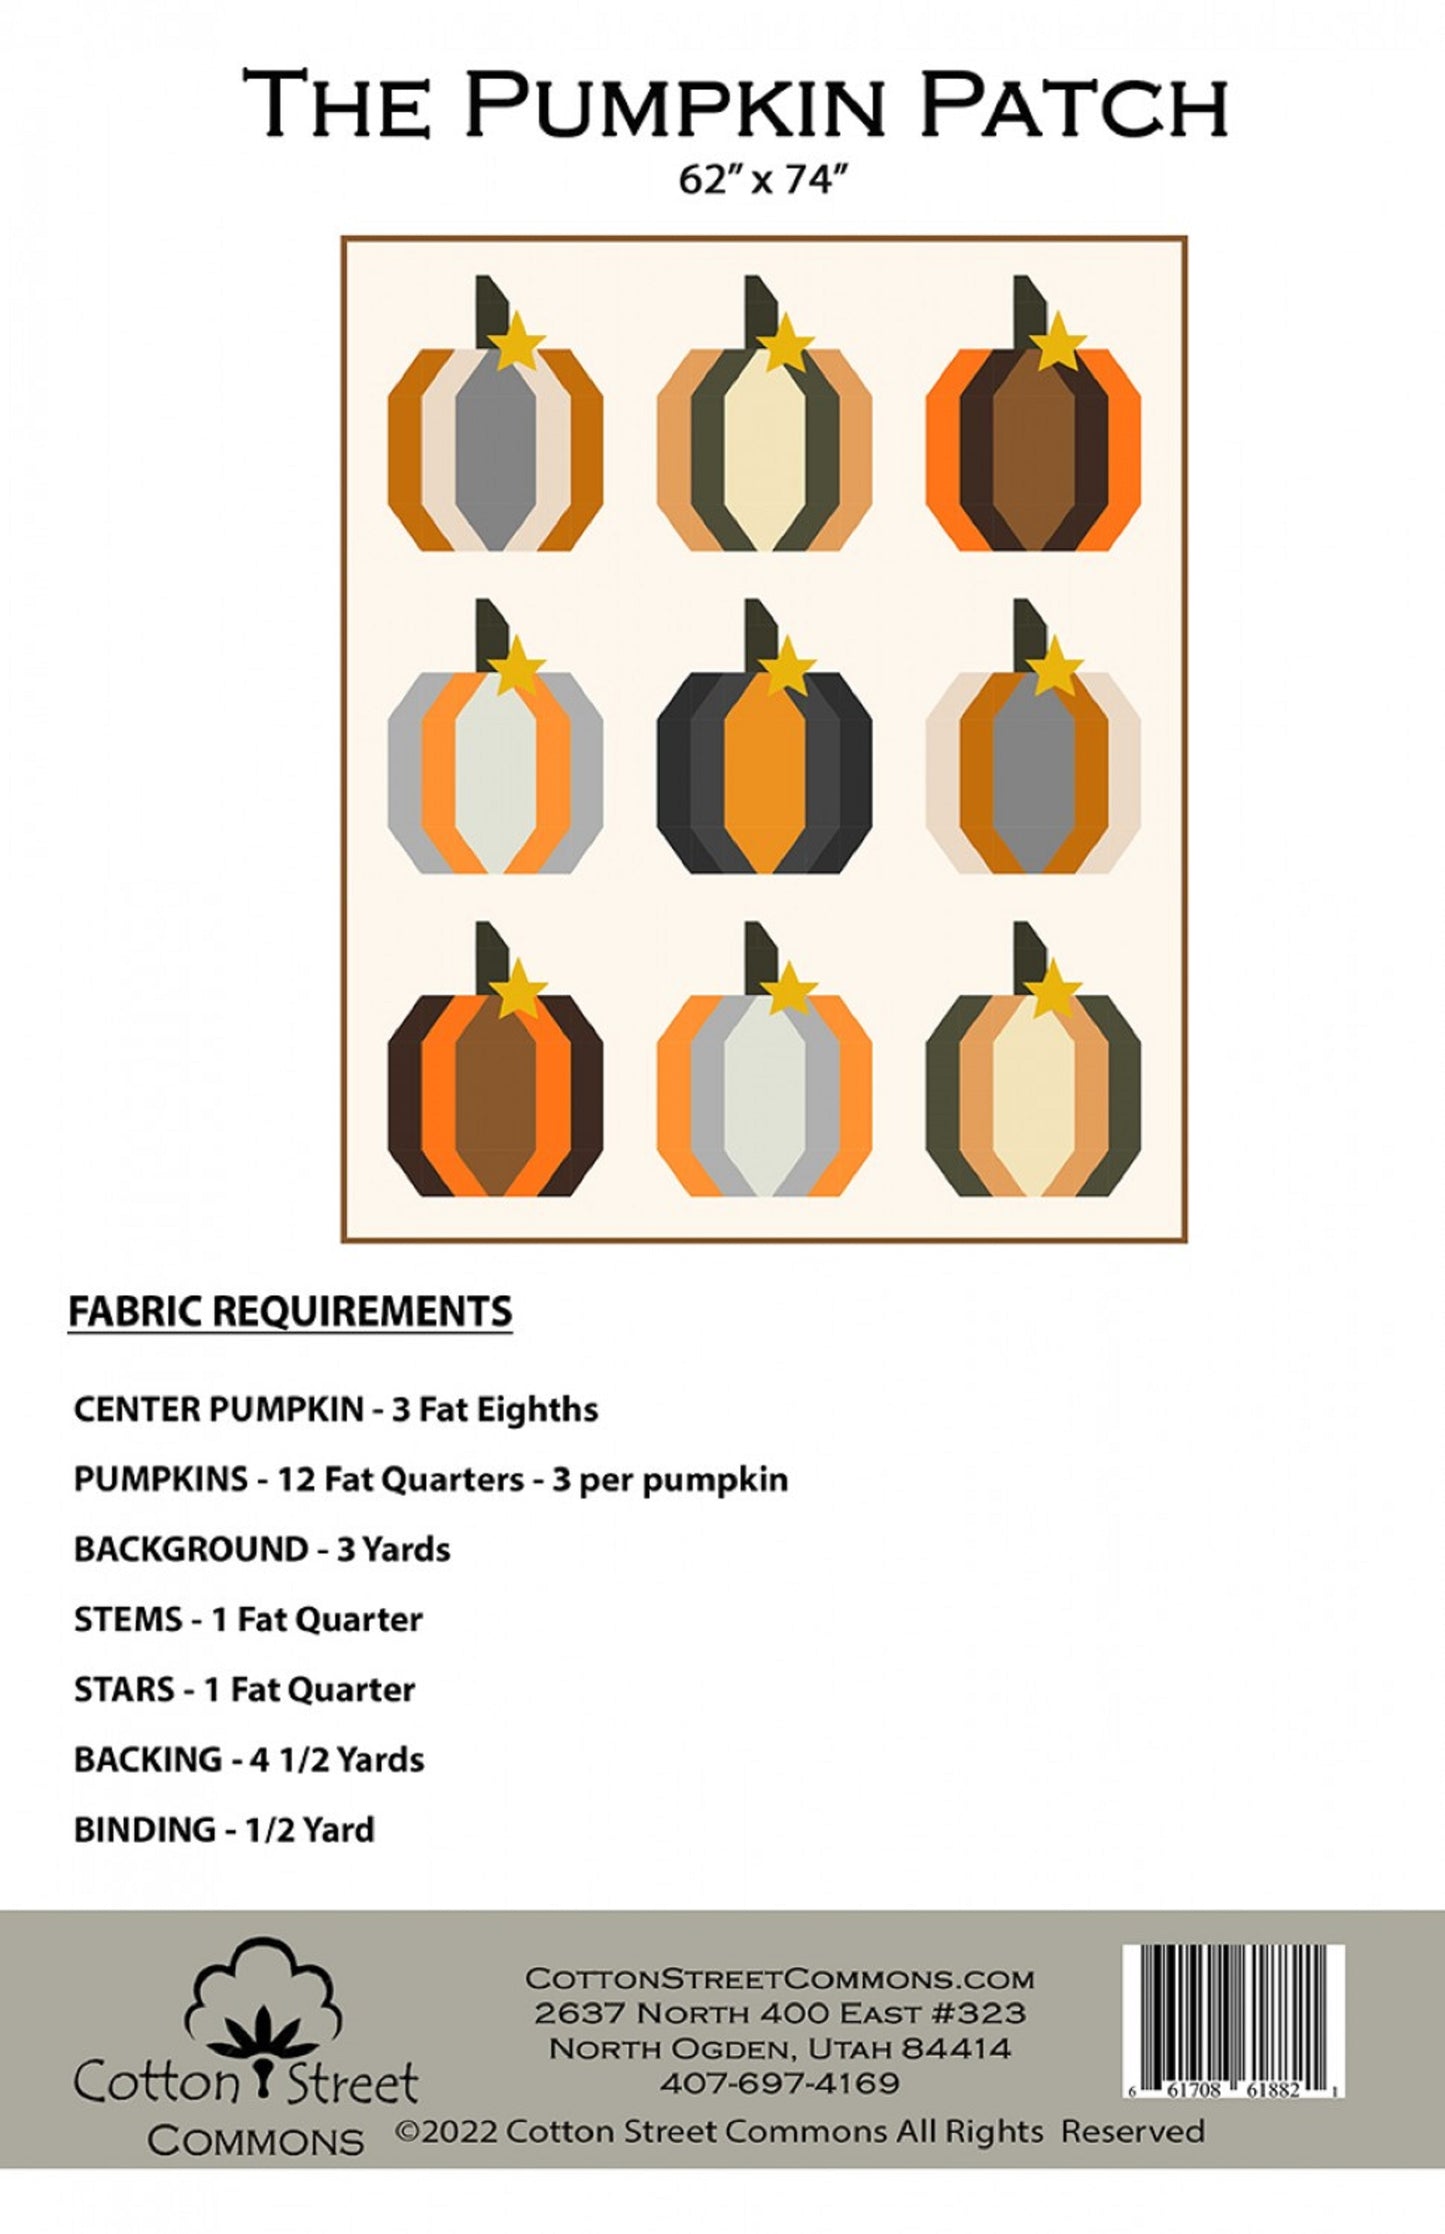 The Pumpkin Patch #250 Pattern by Cotton Street Commons